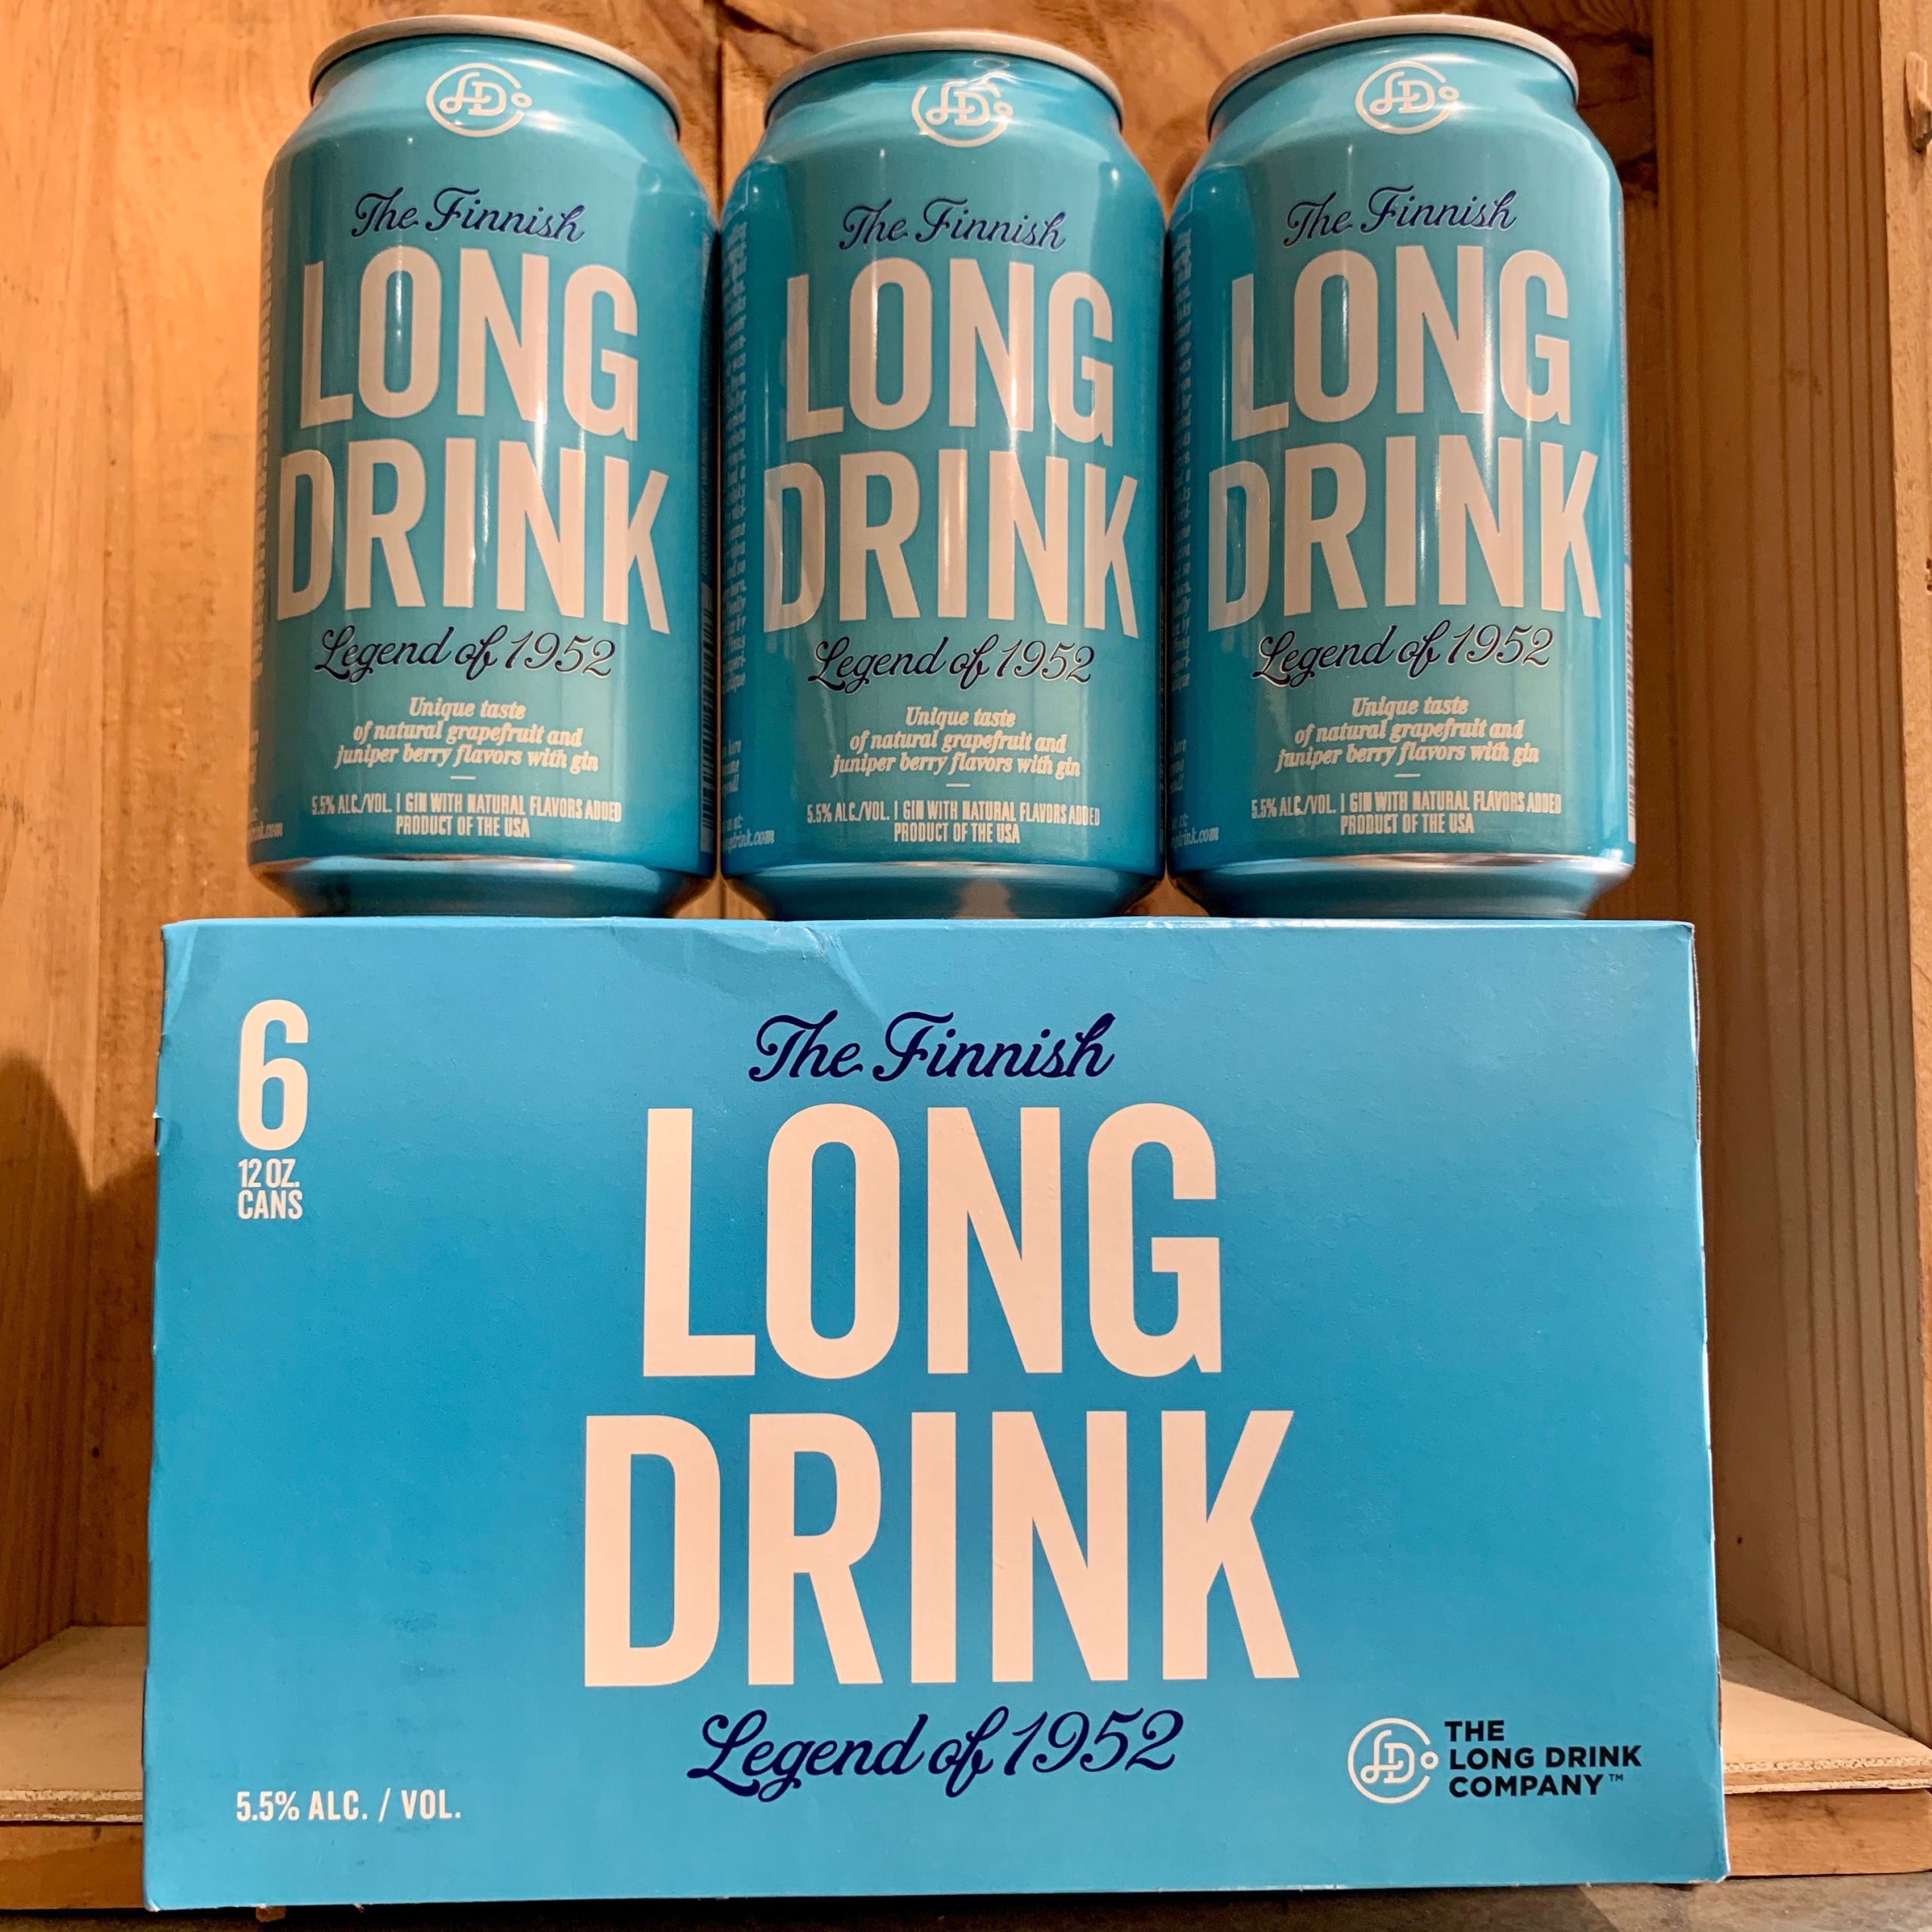 long drink cans